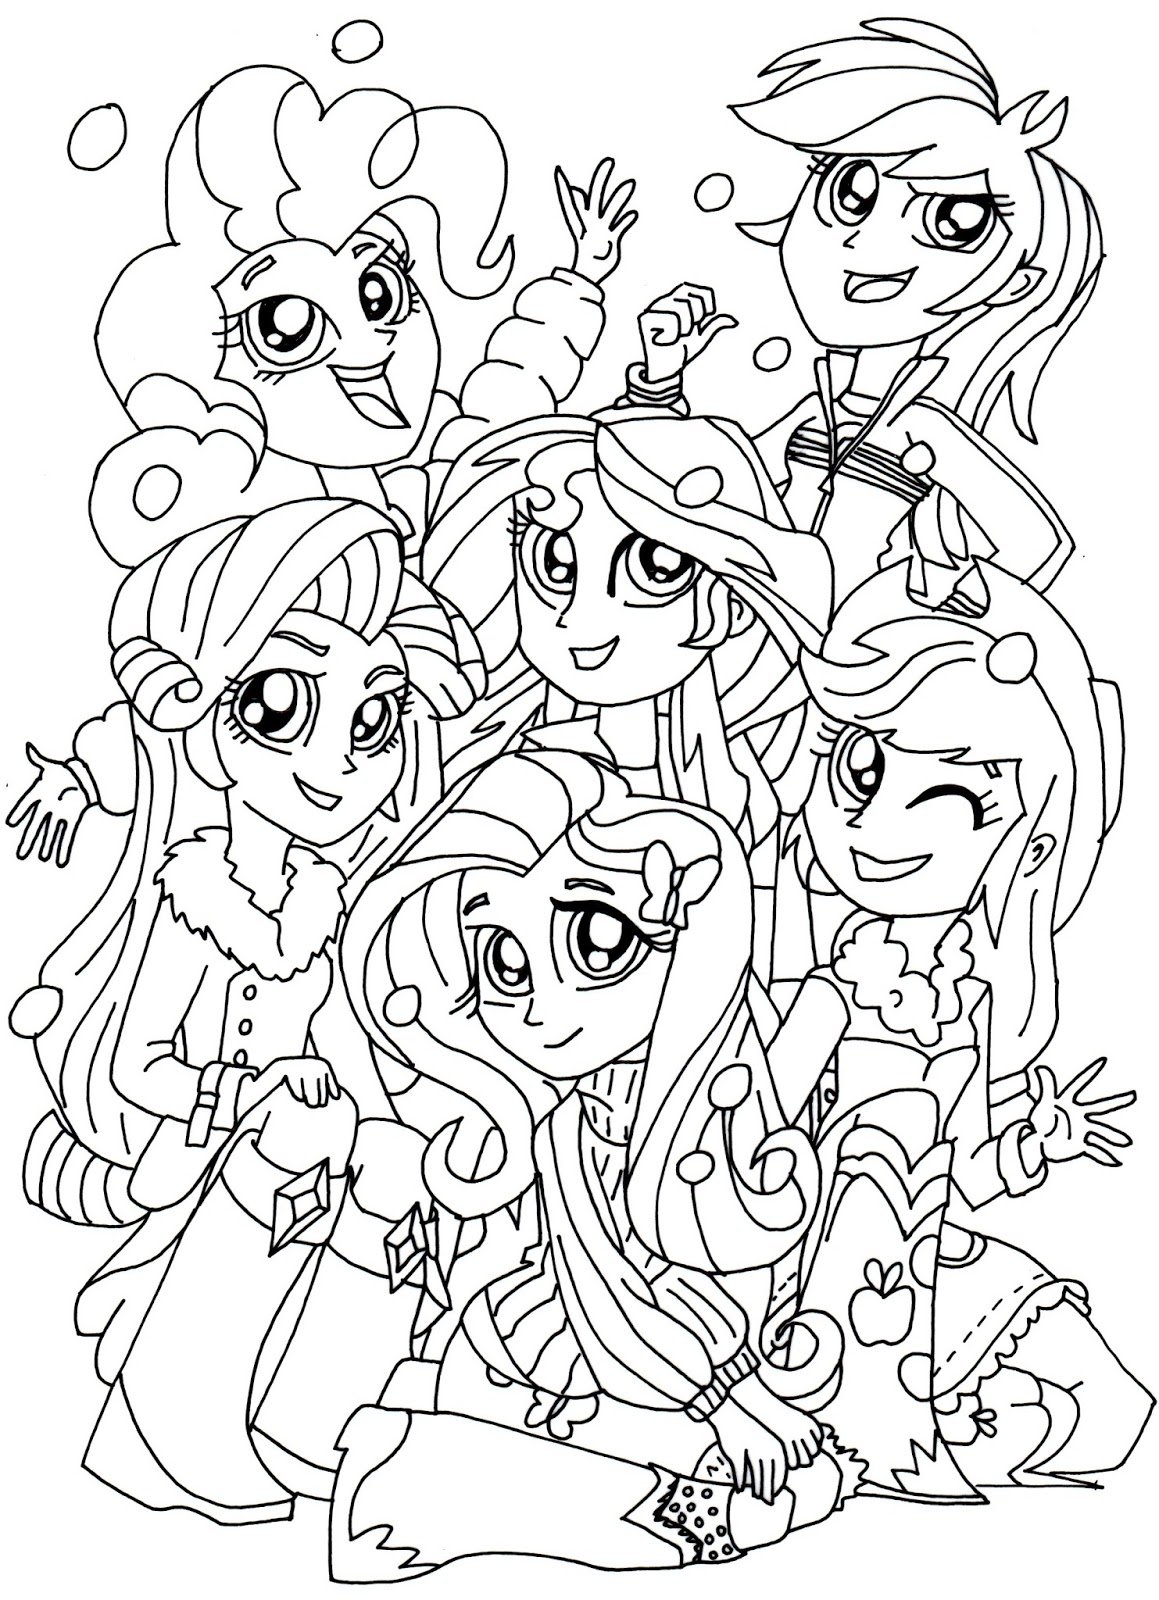 Equestria Girls Coloring Pages - Best Coloring Pages For Kids - FindSource